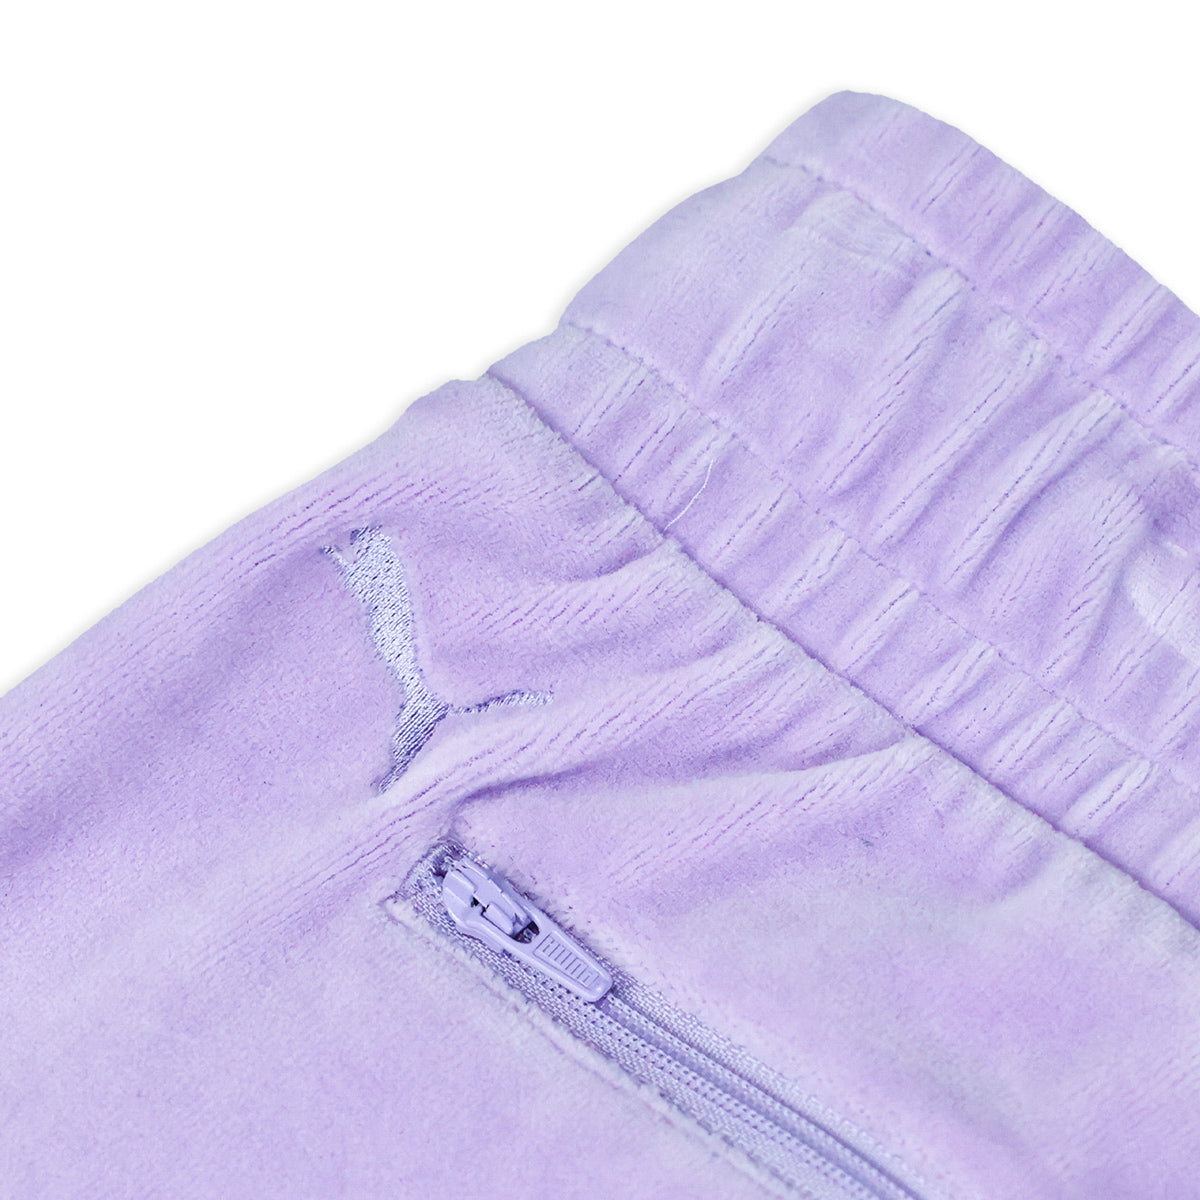 Puma x TMC Hussle Way (People’s Champ) Pants - Violet - Embroidery Detail